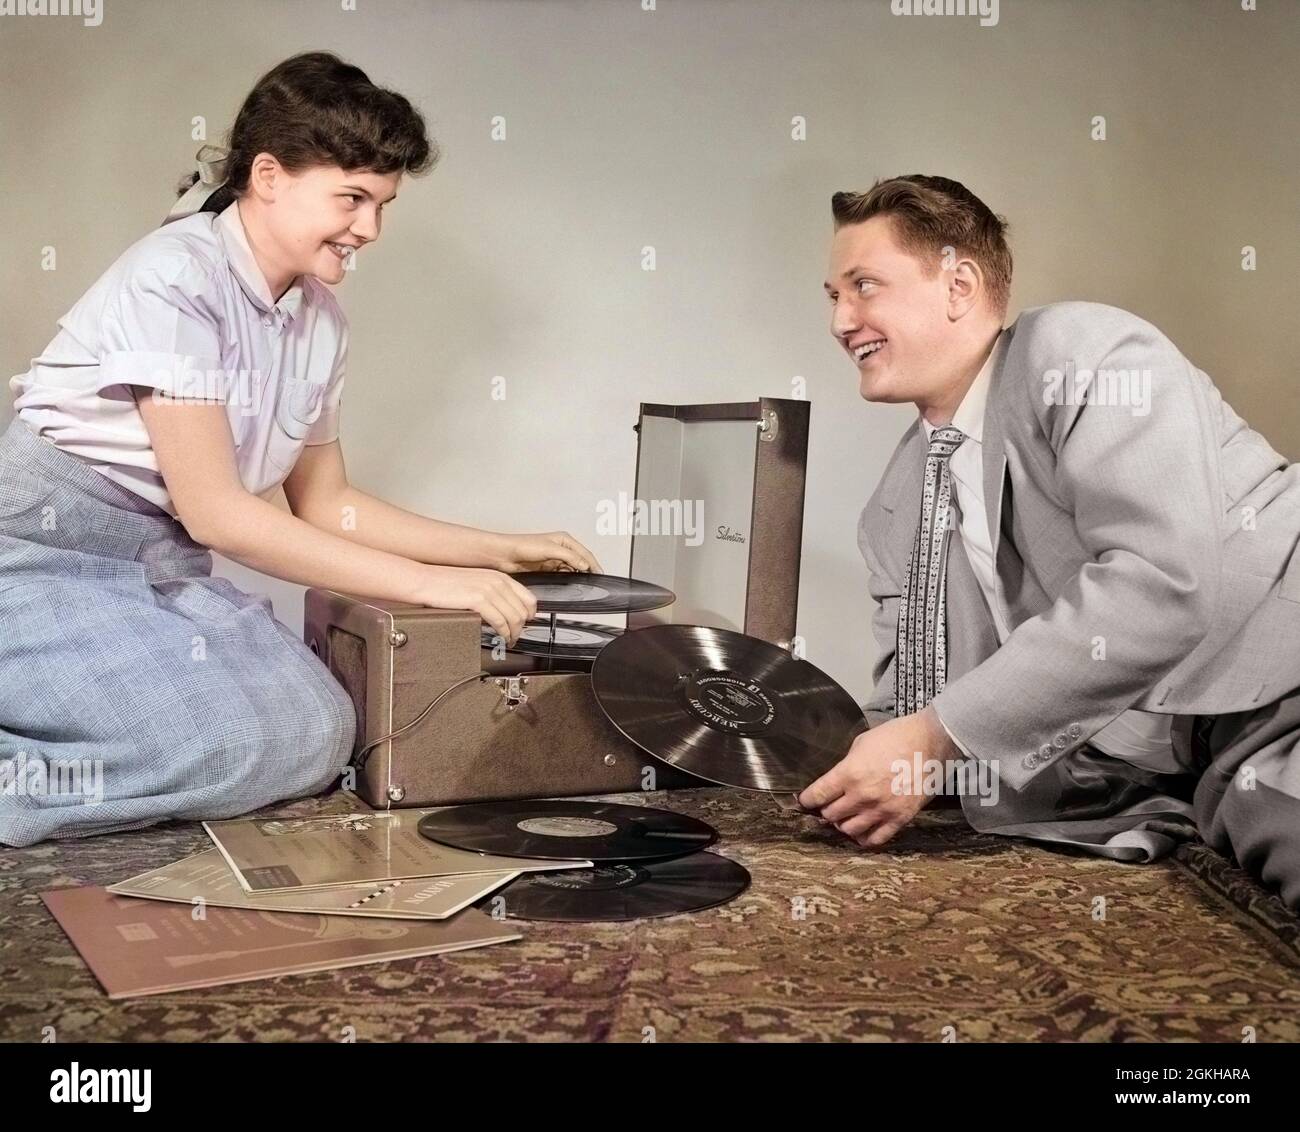 1950s TEENAGE SMILING COUPLE BOY AND GIRL SITTING ON FLOOR PLAYING VINYL MUSIC RECORDS ON PORTABLE PHONOGRAPH - j2427c LAN001 HARS OLD FASHION 1 JUVENILE STYLE COMMUNICATION YOUNG ADULT RECORDS VINYL PLEASED JOY LIFESTYLE FEMALES STUDIO SHOT HEALTHINESS HOME LIFE COPY SPACE PEOPLE CHILDREN FRIENDSHIP HALF-LENGTH PERSONS MALES TEENAGE GIRL TEENAGE BOY ENTERTAINMENT PORTABLE B&W PHONOGRAPH DATING HAPPINESS CHOICE RECORD PLAYER ATTRACTION SMILES 33 RPM COURTSHIP JOYFUL STYLISH TEENAGED YOUNG LOVE LP POSSIBILITY JUVENILES LONG-PLAYING SOCIAL ACTIVITY TOGETHERNESS YOUNG ADULT MAN YOUNG ADULT WOMAN Stock Photo